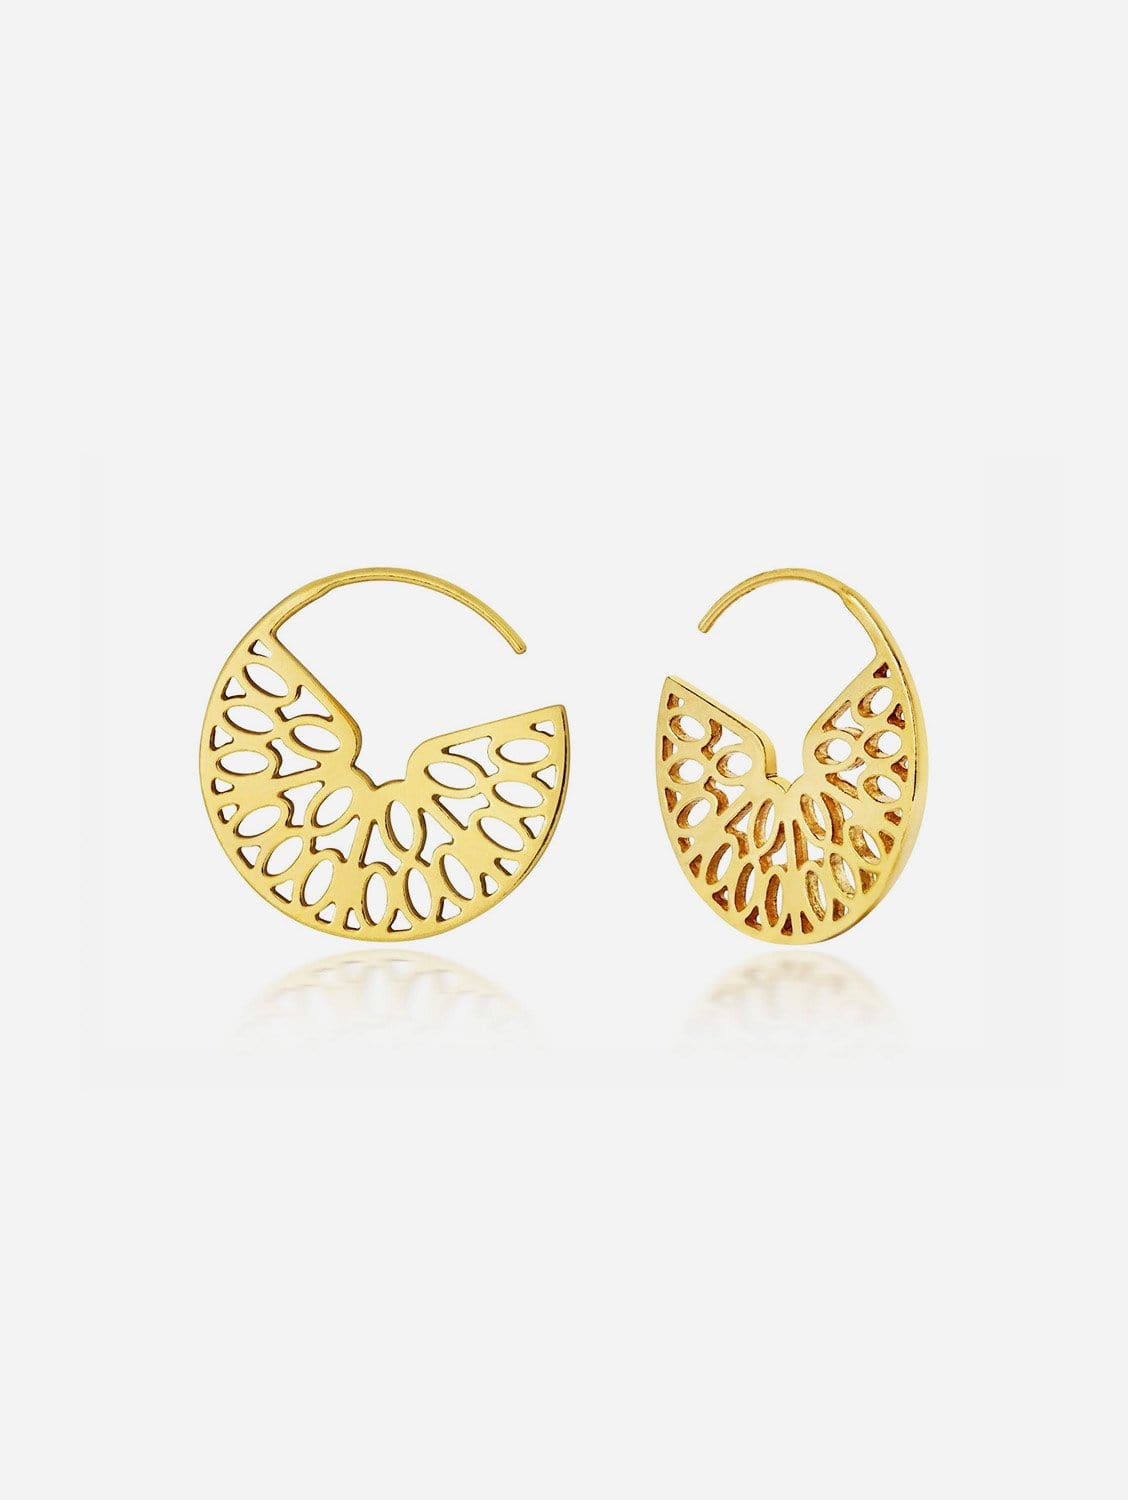 Seville 925 Sterling Silver Hoop Earrings | 24ct Gold Plated